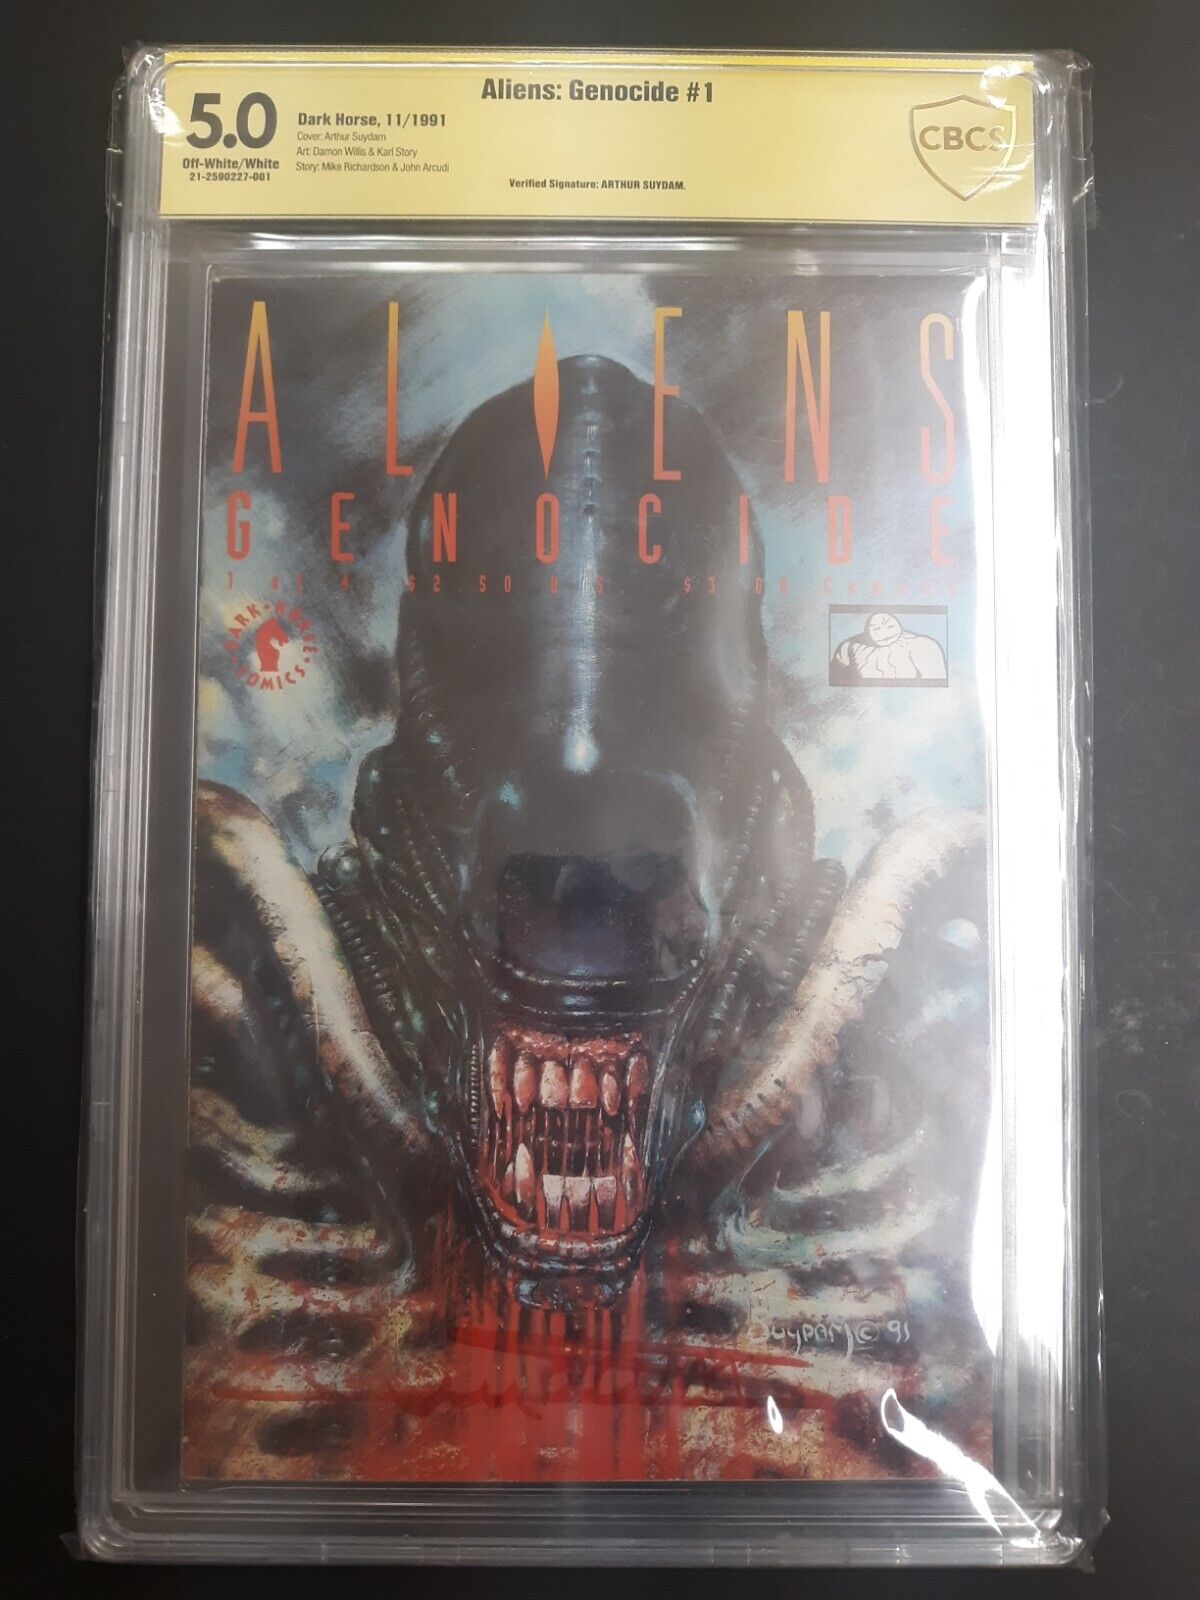 Aliens: Genocide #1 (1991) SIGNED by ARTHUR SUYDAM CBCS Graded 5.0 VG/FN